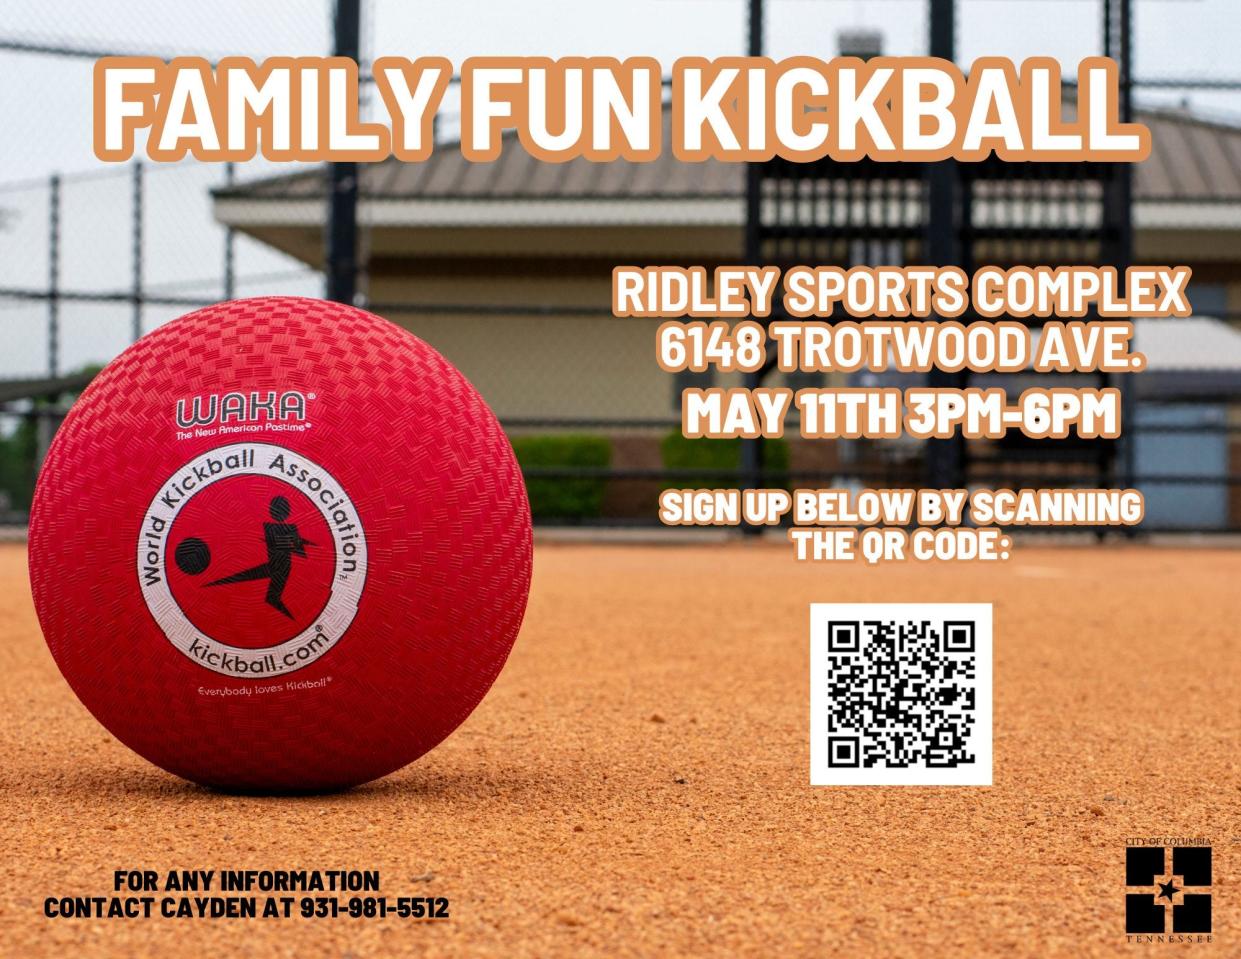 Take in a family fun game of kickball this weekend at Ridley Sports Complex from 3-6 p.m., hosted by Columbia Parks and Recreation. Scan the event's QR code to register.